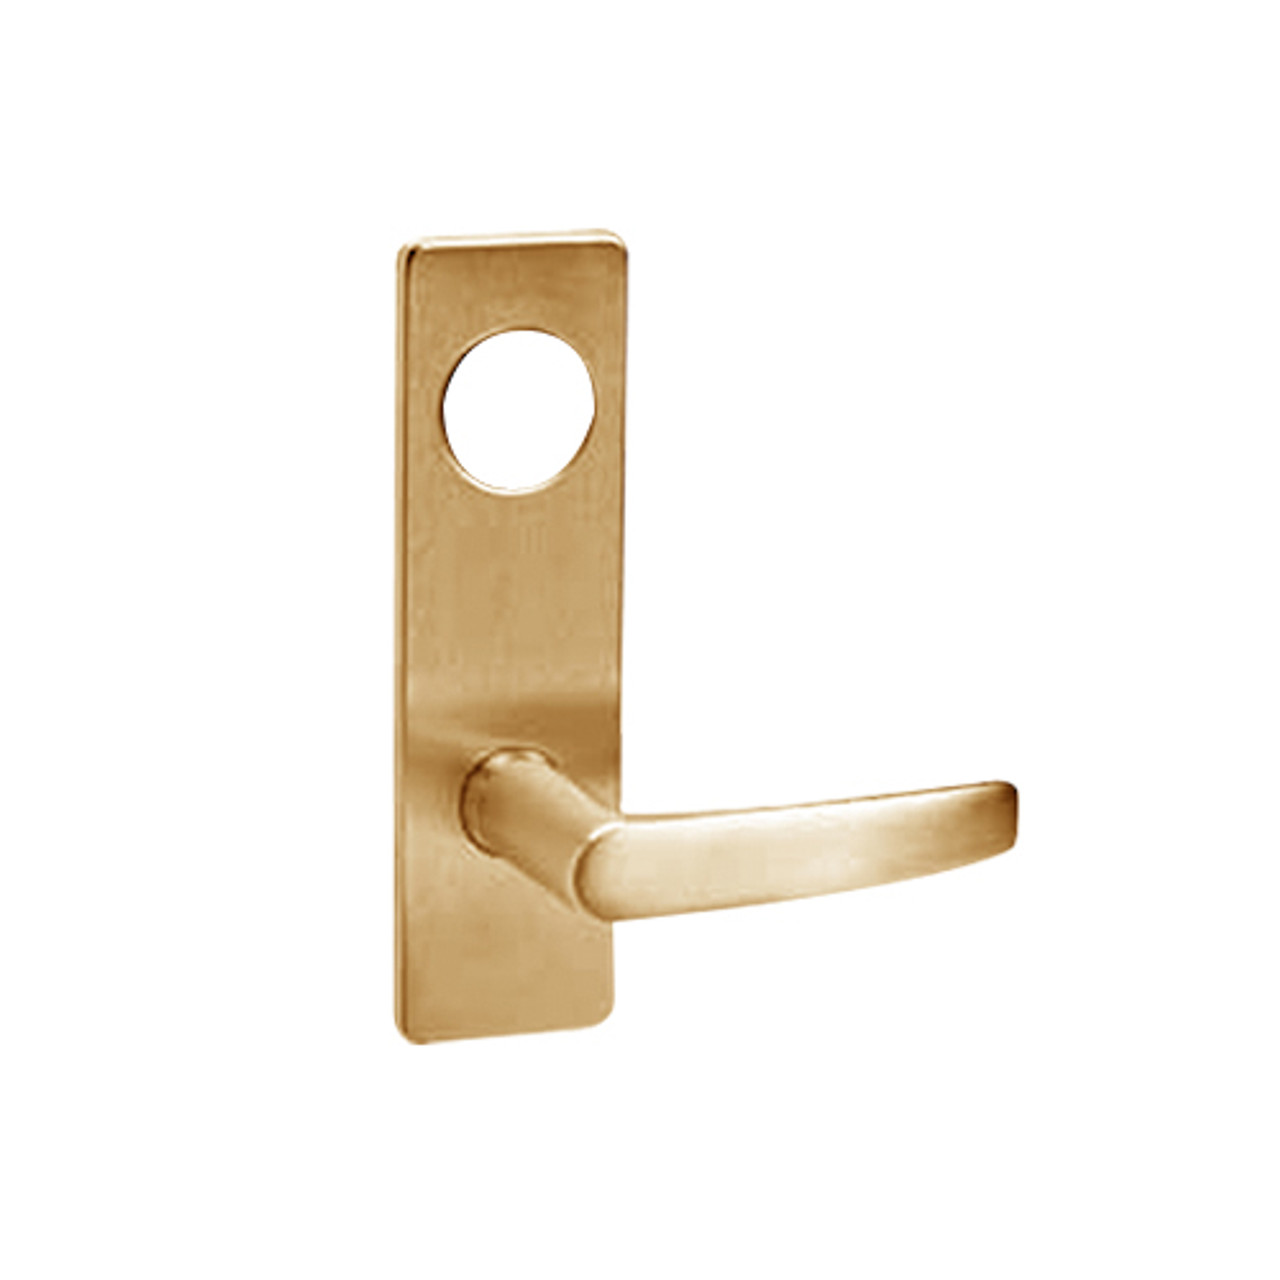 ML2054-ASM-612-M31 Corbin Russwin ML2000 Series Mortise Entrance Trim Pack with Armstrong Lever in Satin Bronze